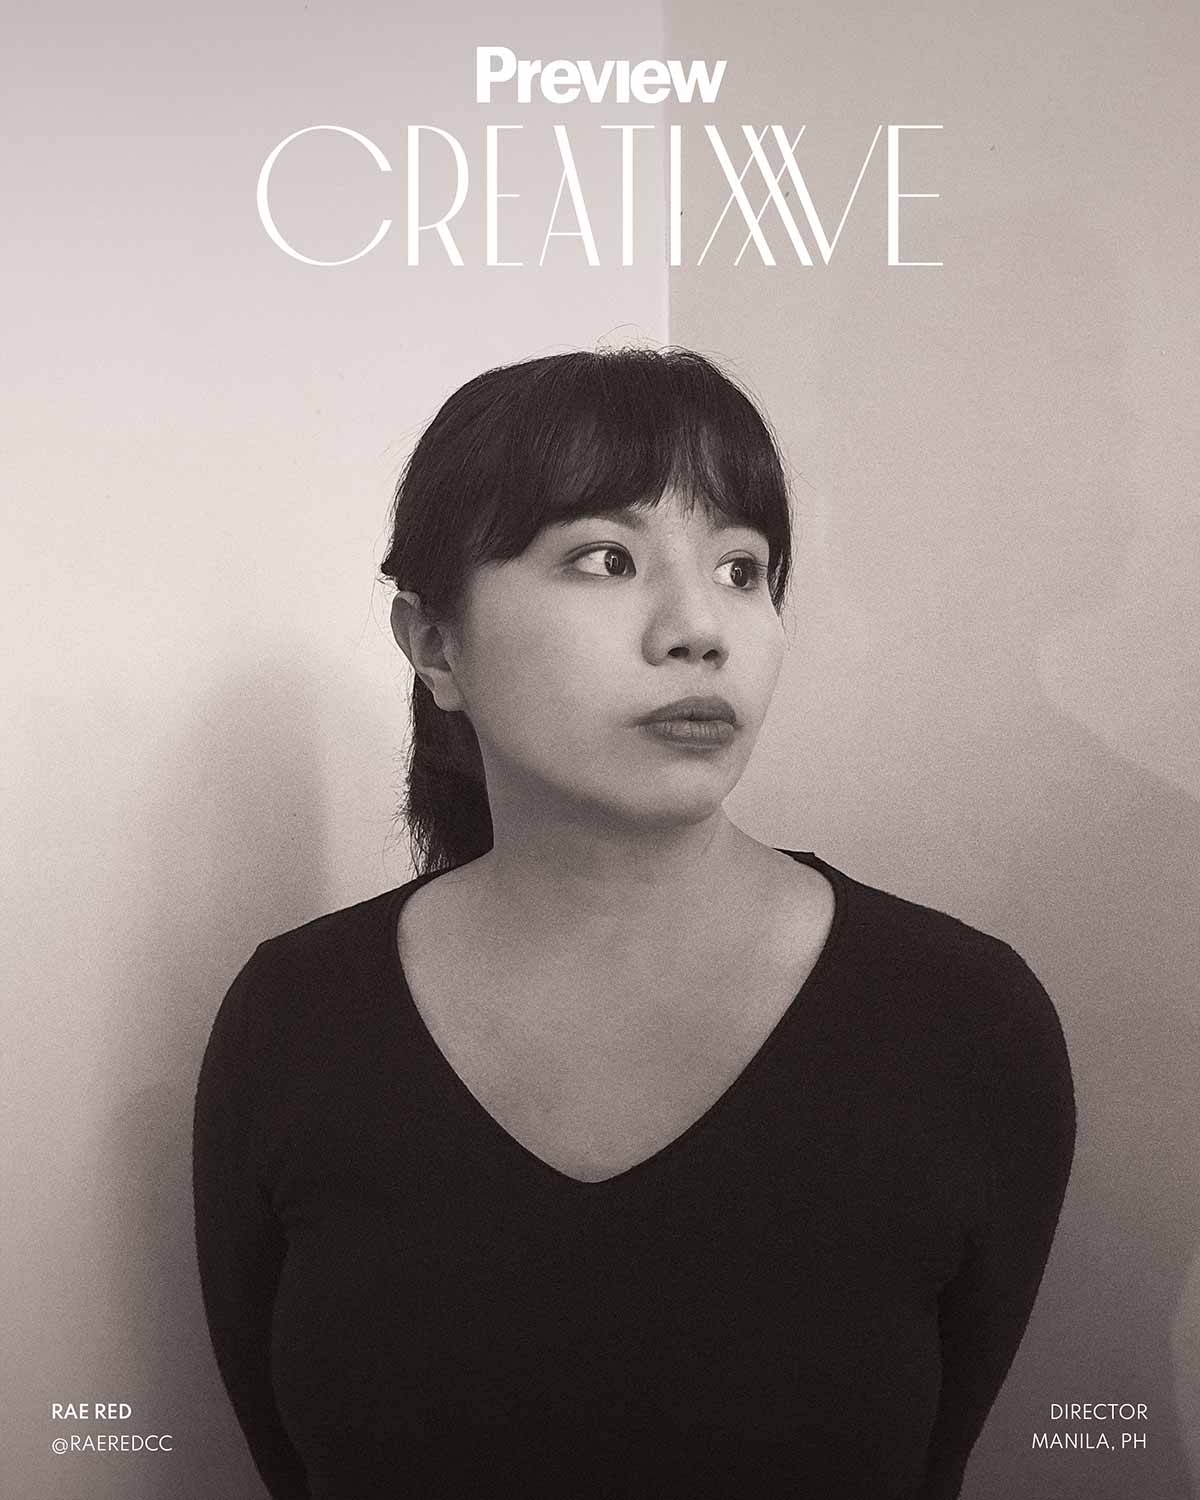 preview creative 25: rae red